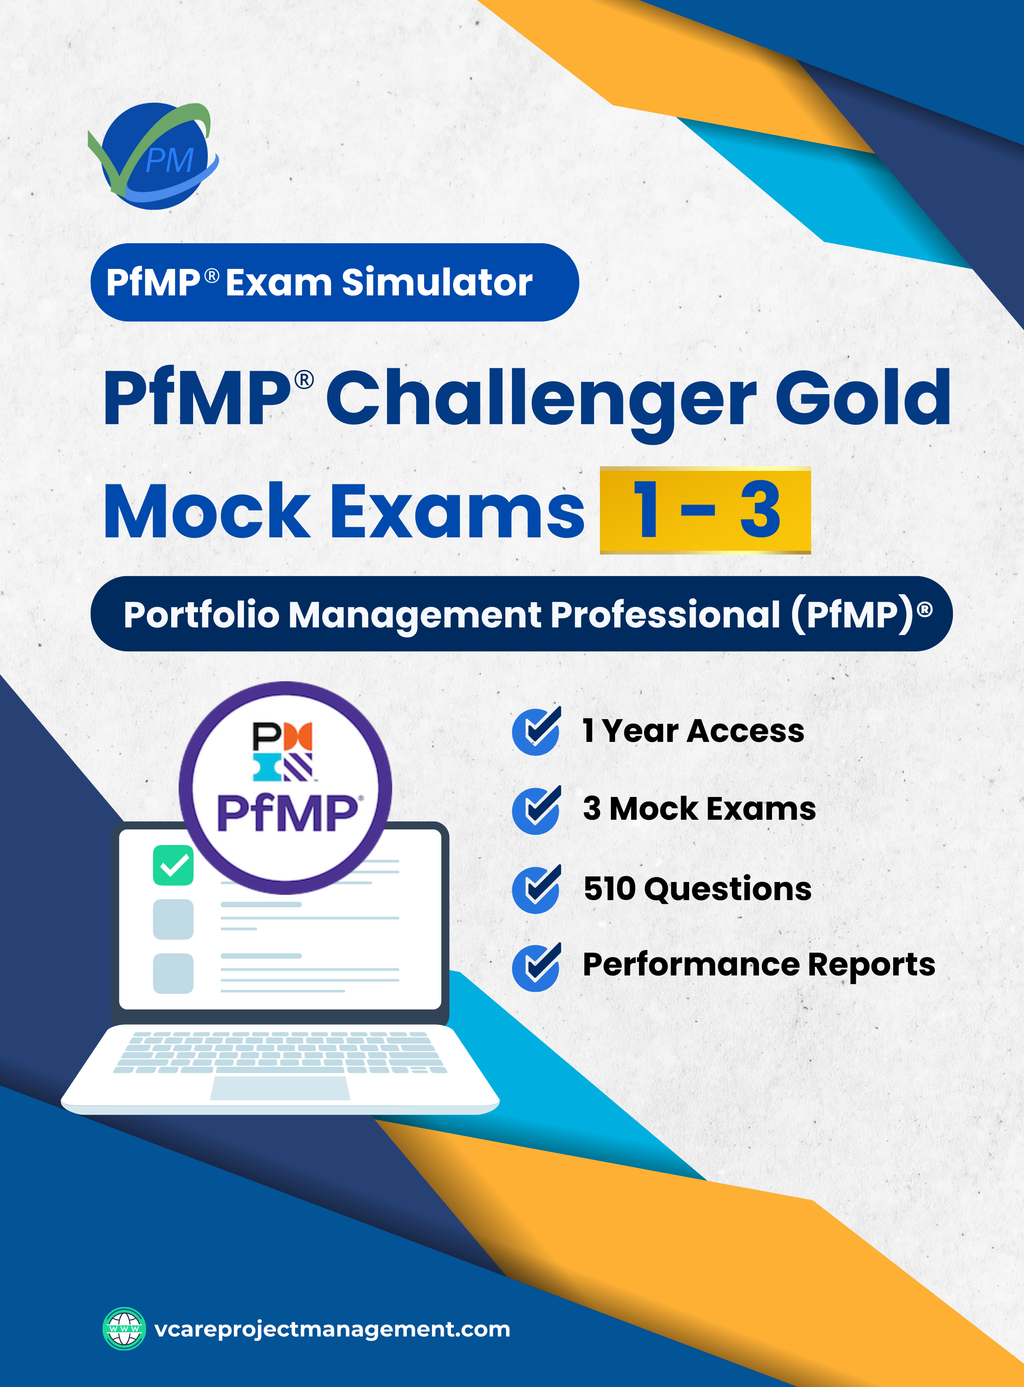 PfMP Challenger Gold (Mock Exams 1 to 3) - 1 Year Access